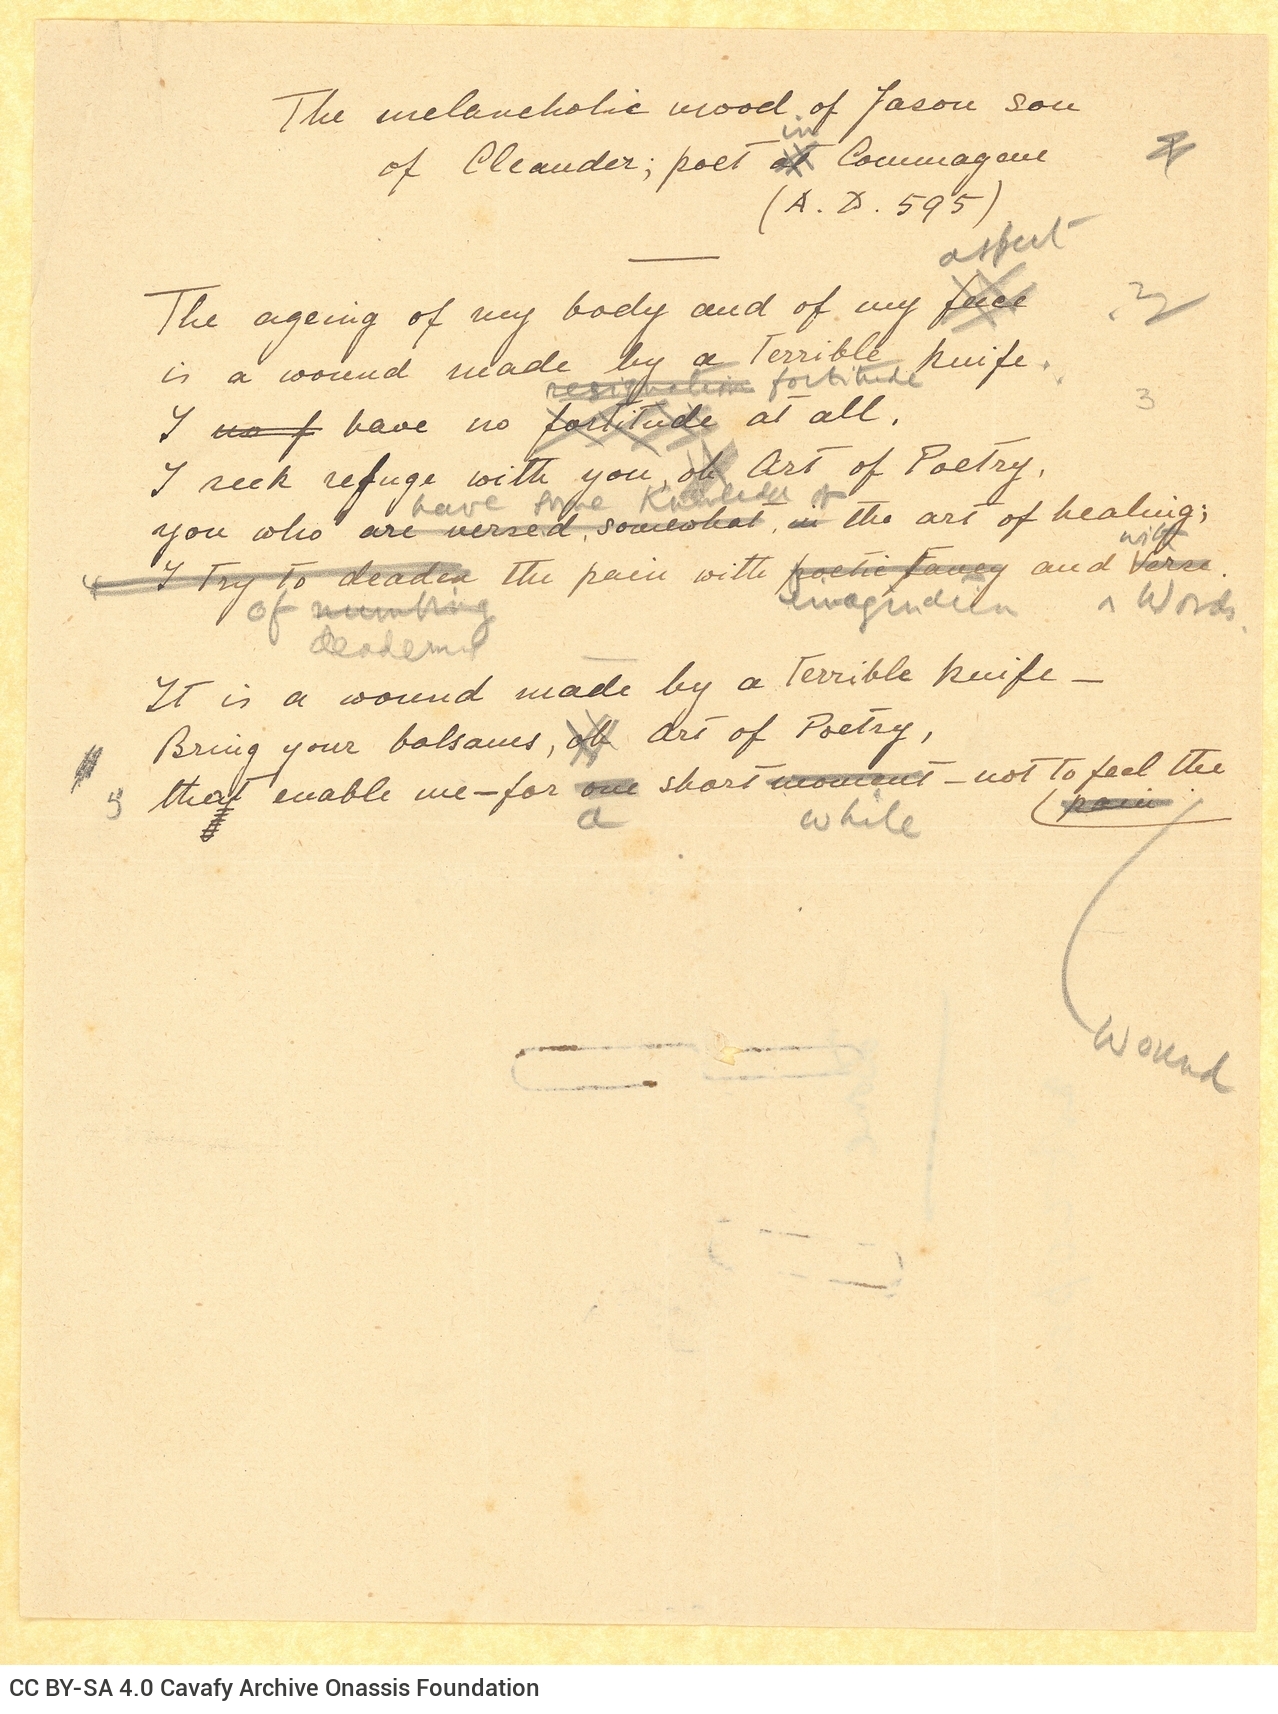 Handwritten English translation of the poem"Melancholy of Jason, Son of Cleander: Poet in Commagene: 595 A.D." by G. Valas